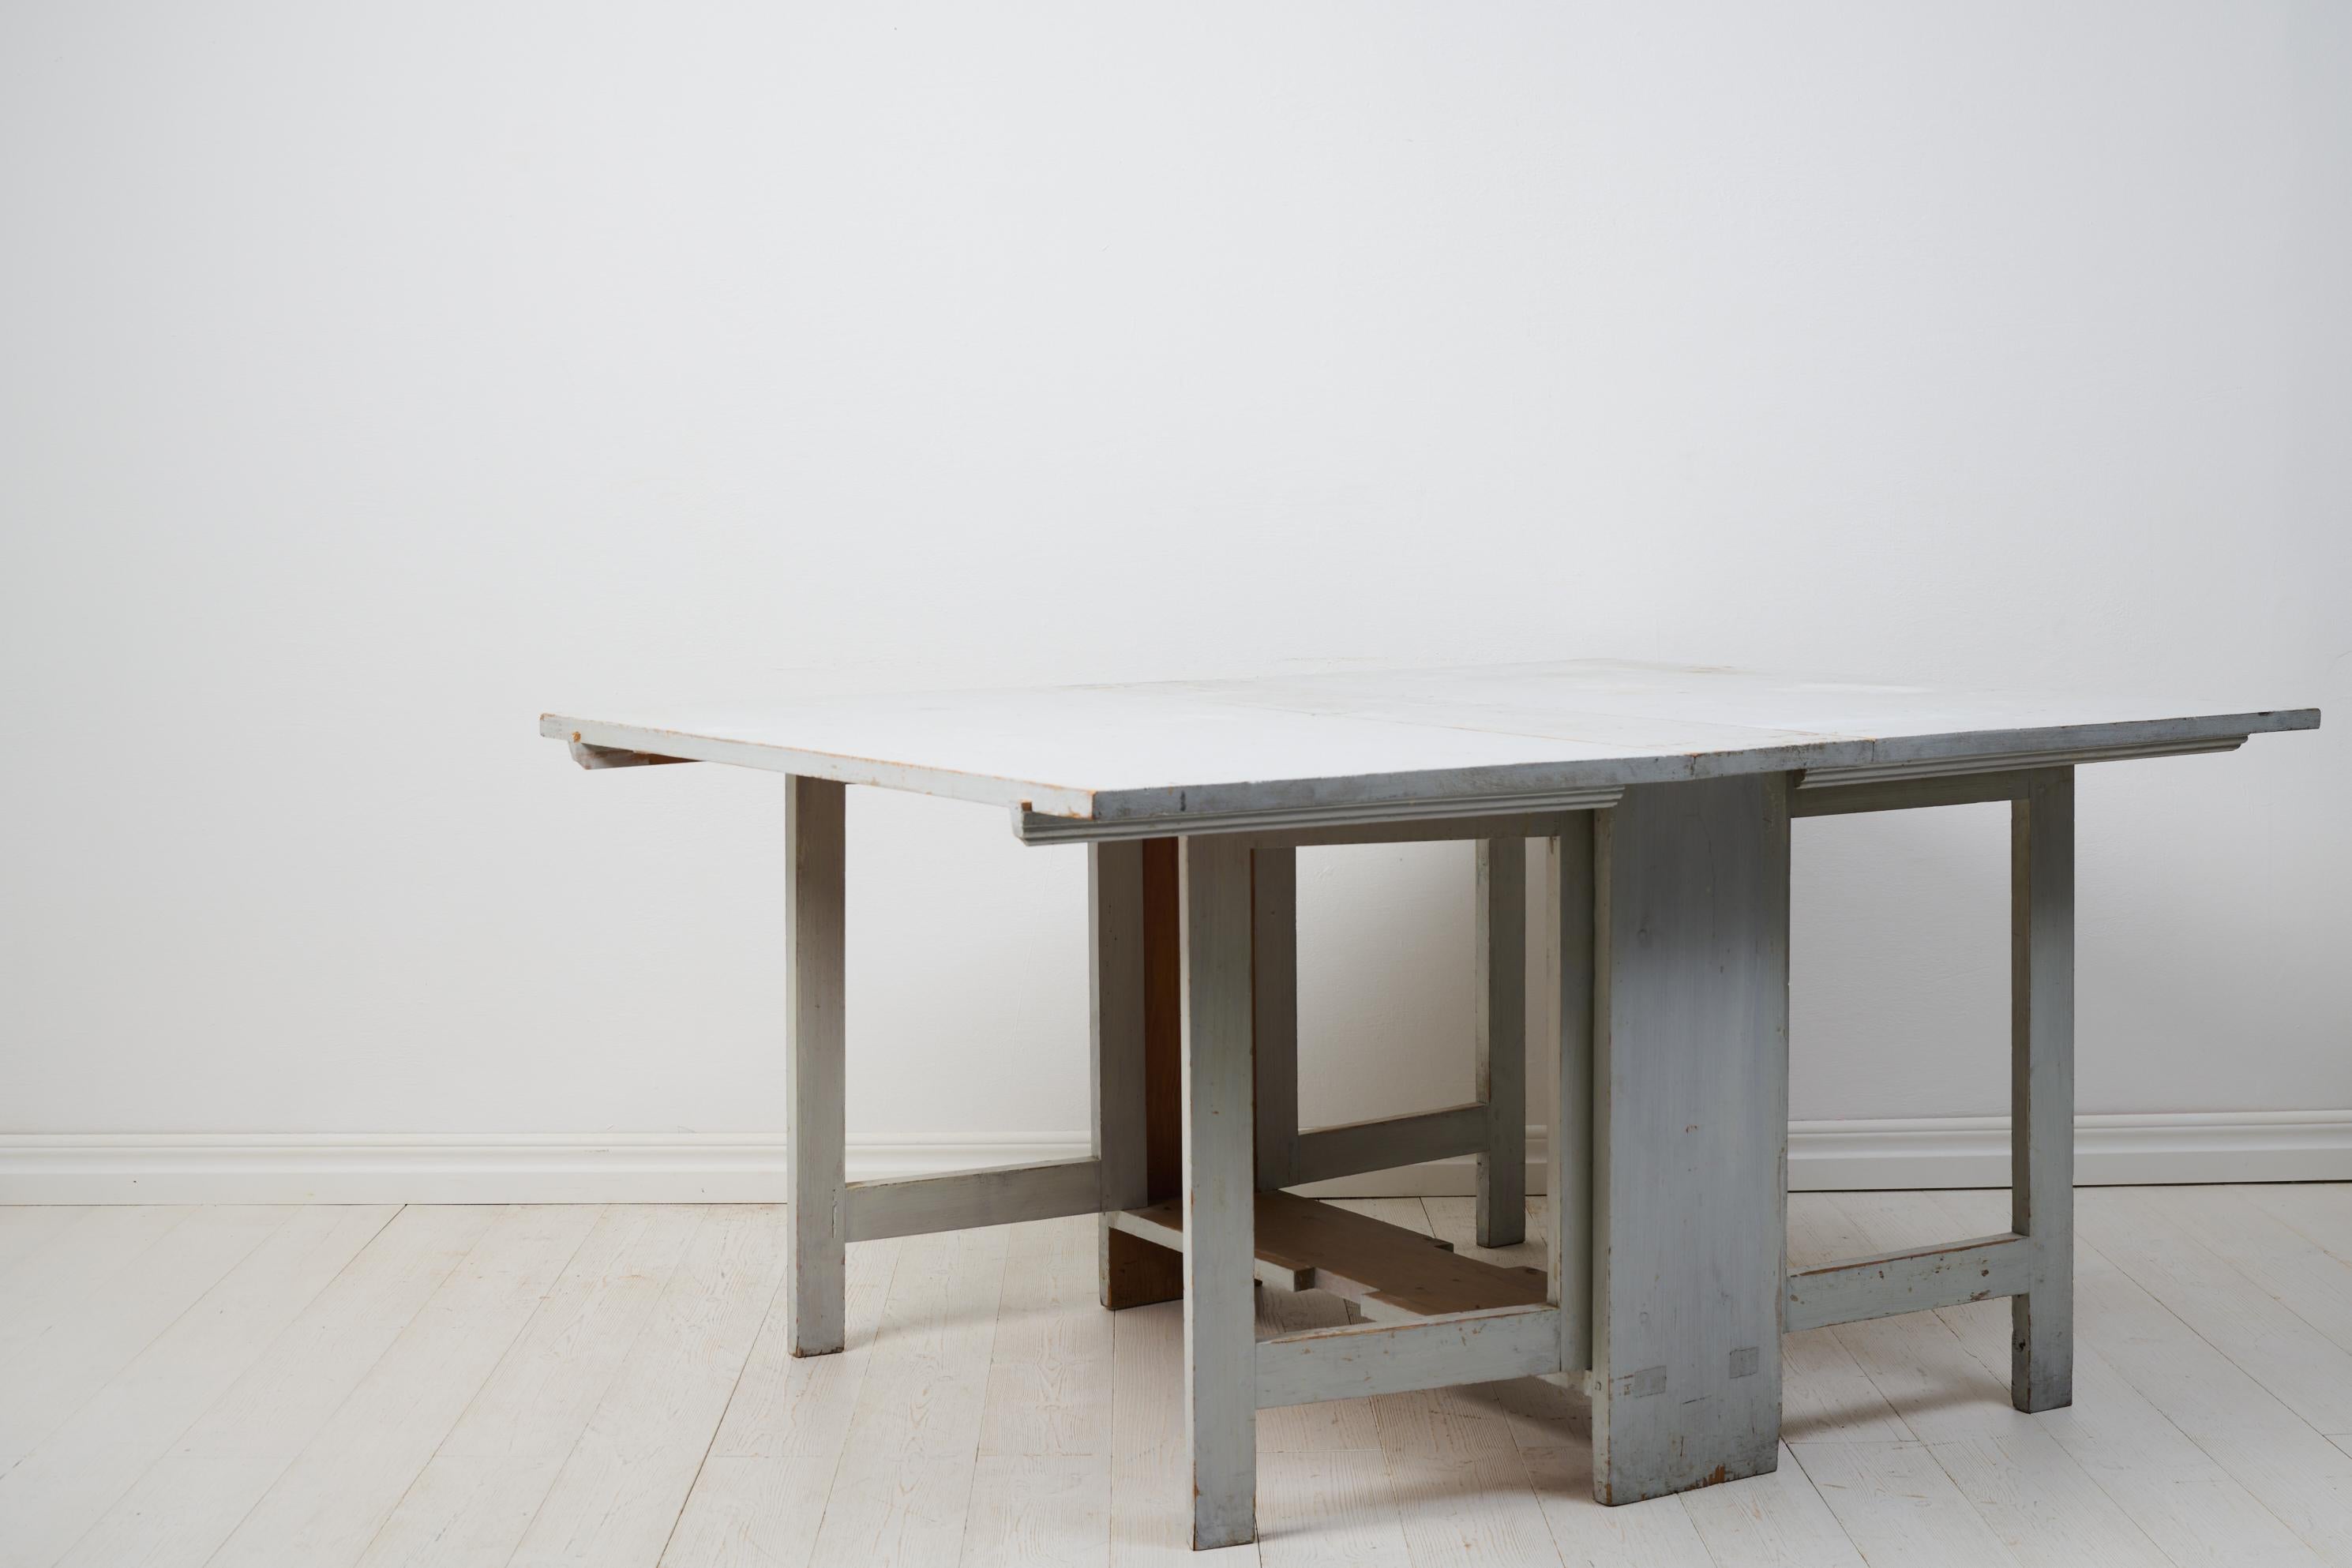 Antique Northern Swedish Genuine Gustavian Light Drop-Leaf Table In Good Condition For Sale In Kramfors, SE